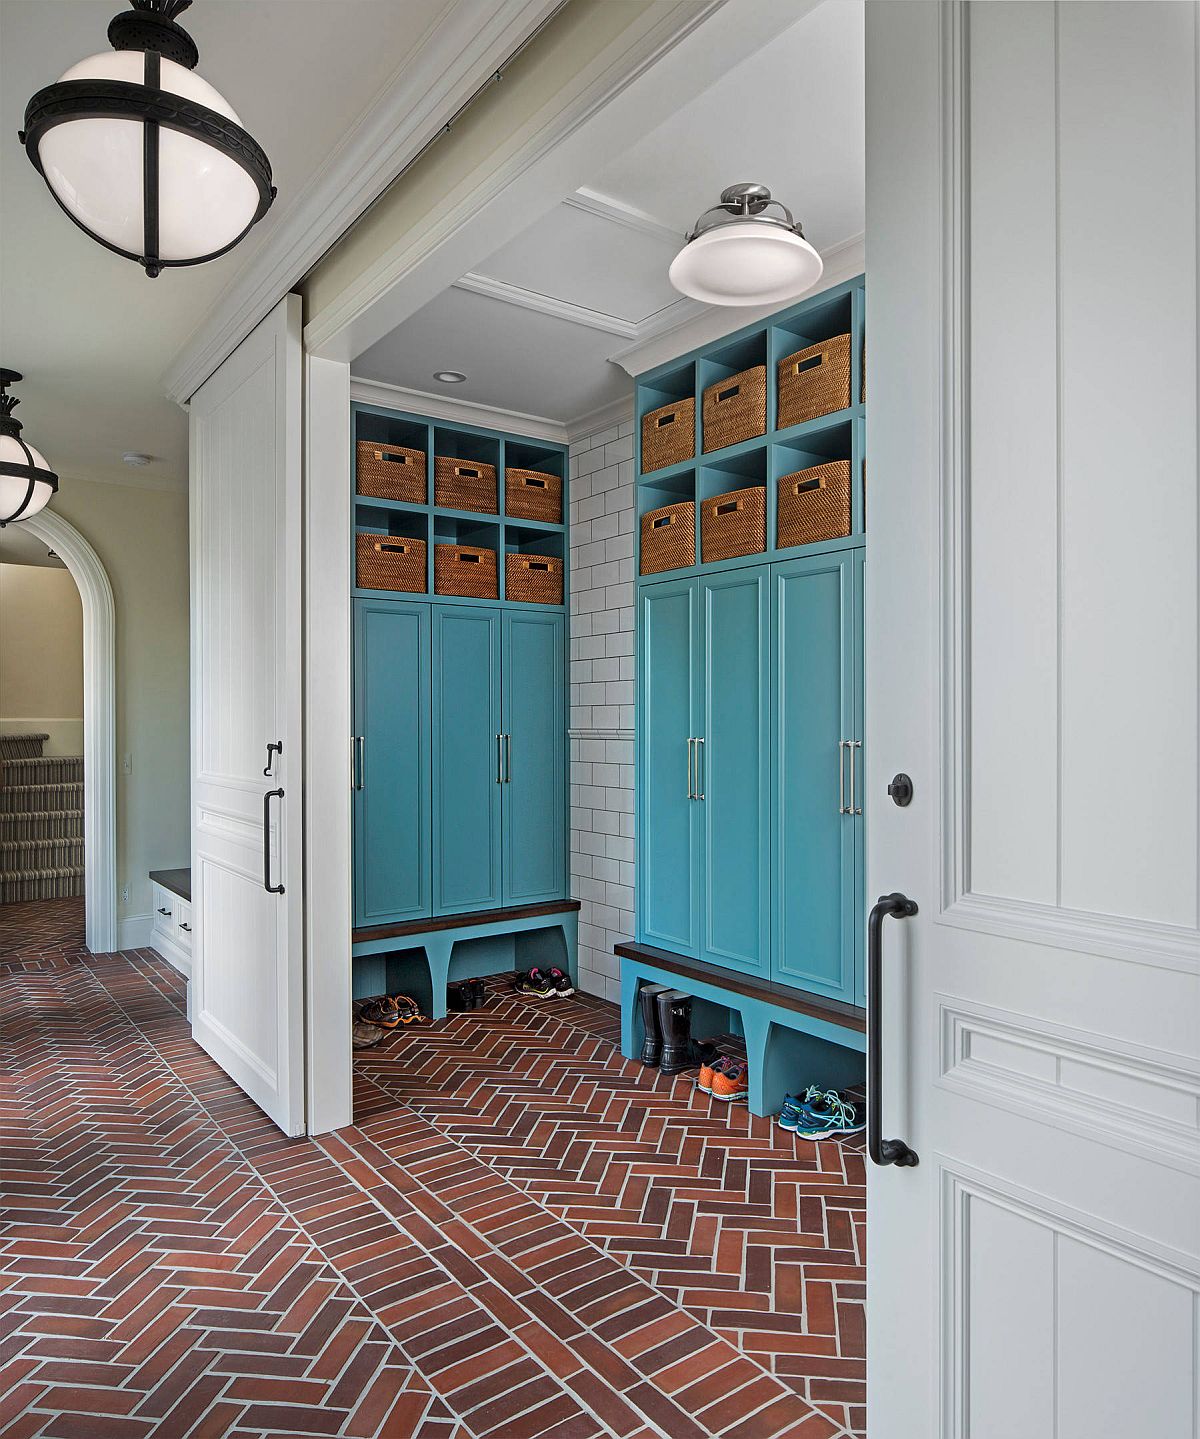 Brick floor in this modern entryway also adds herringbone pattern to the setting